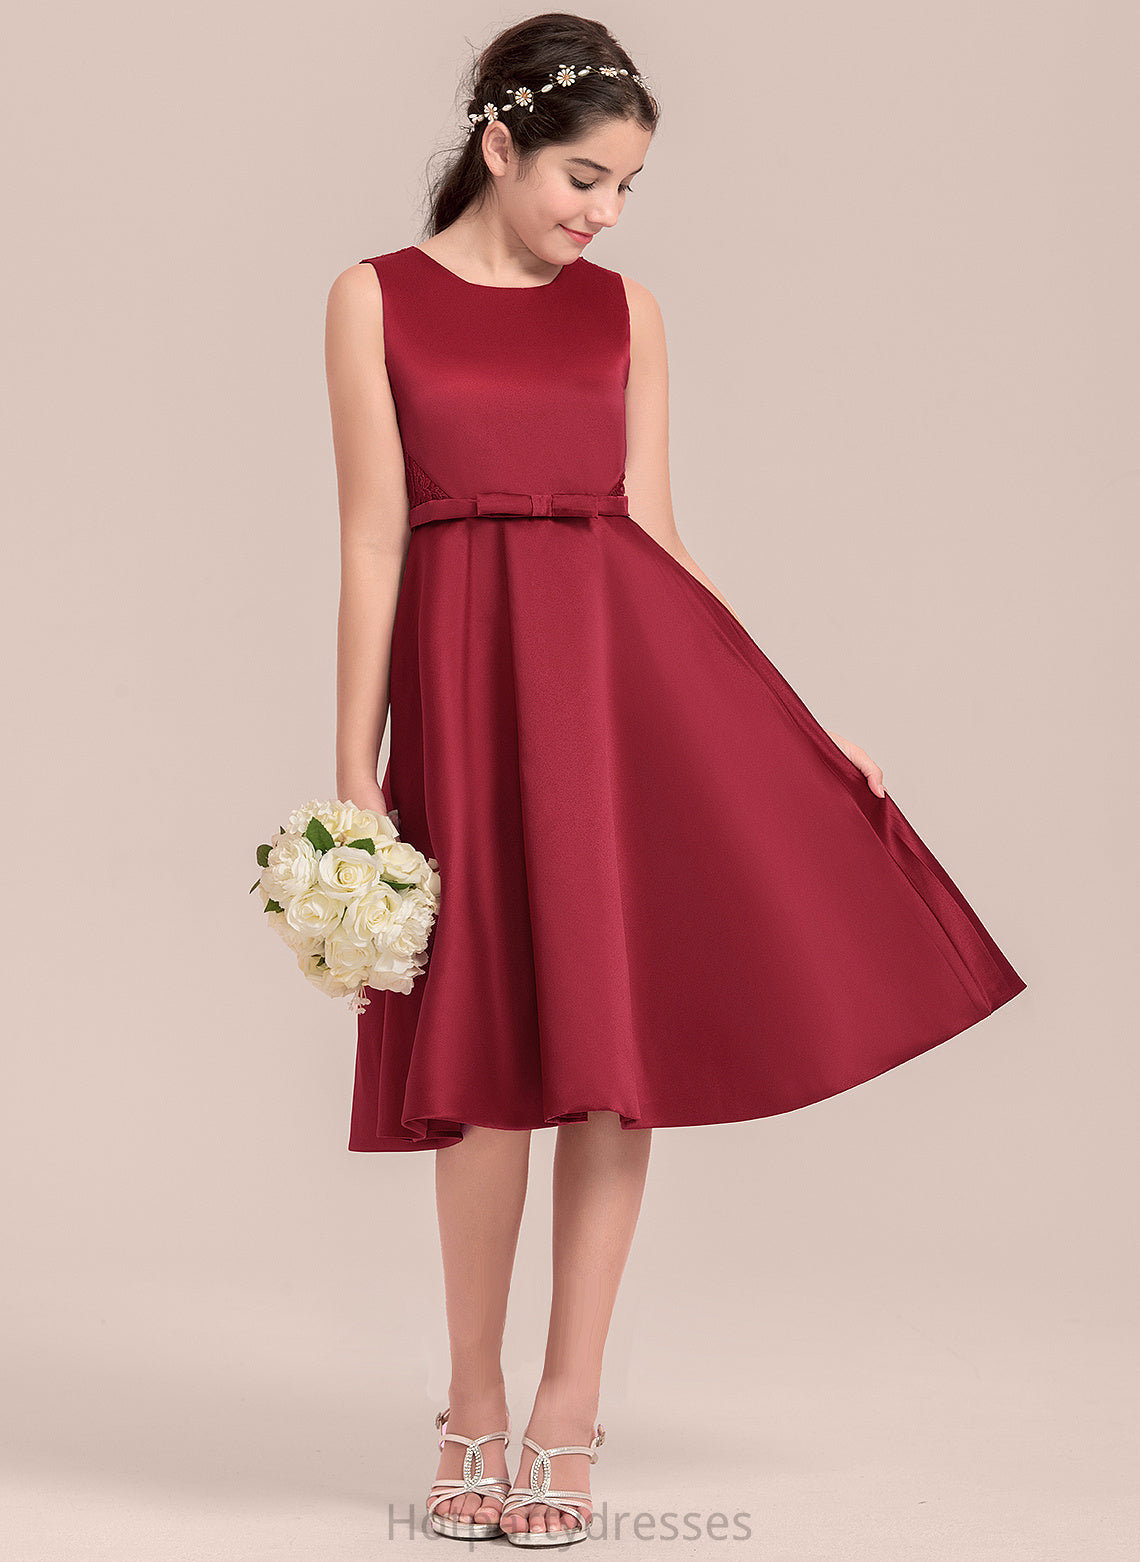 Scoop Knee-Length A-Line Neck With Junior Bridesmaid Dresses Lace Satin Bow(s) Savanah